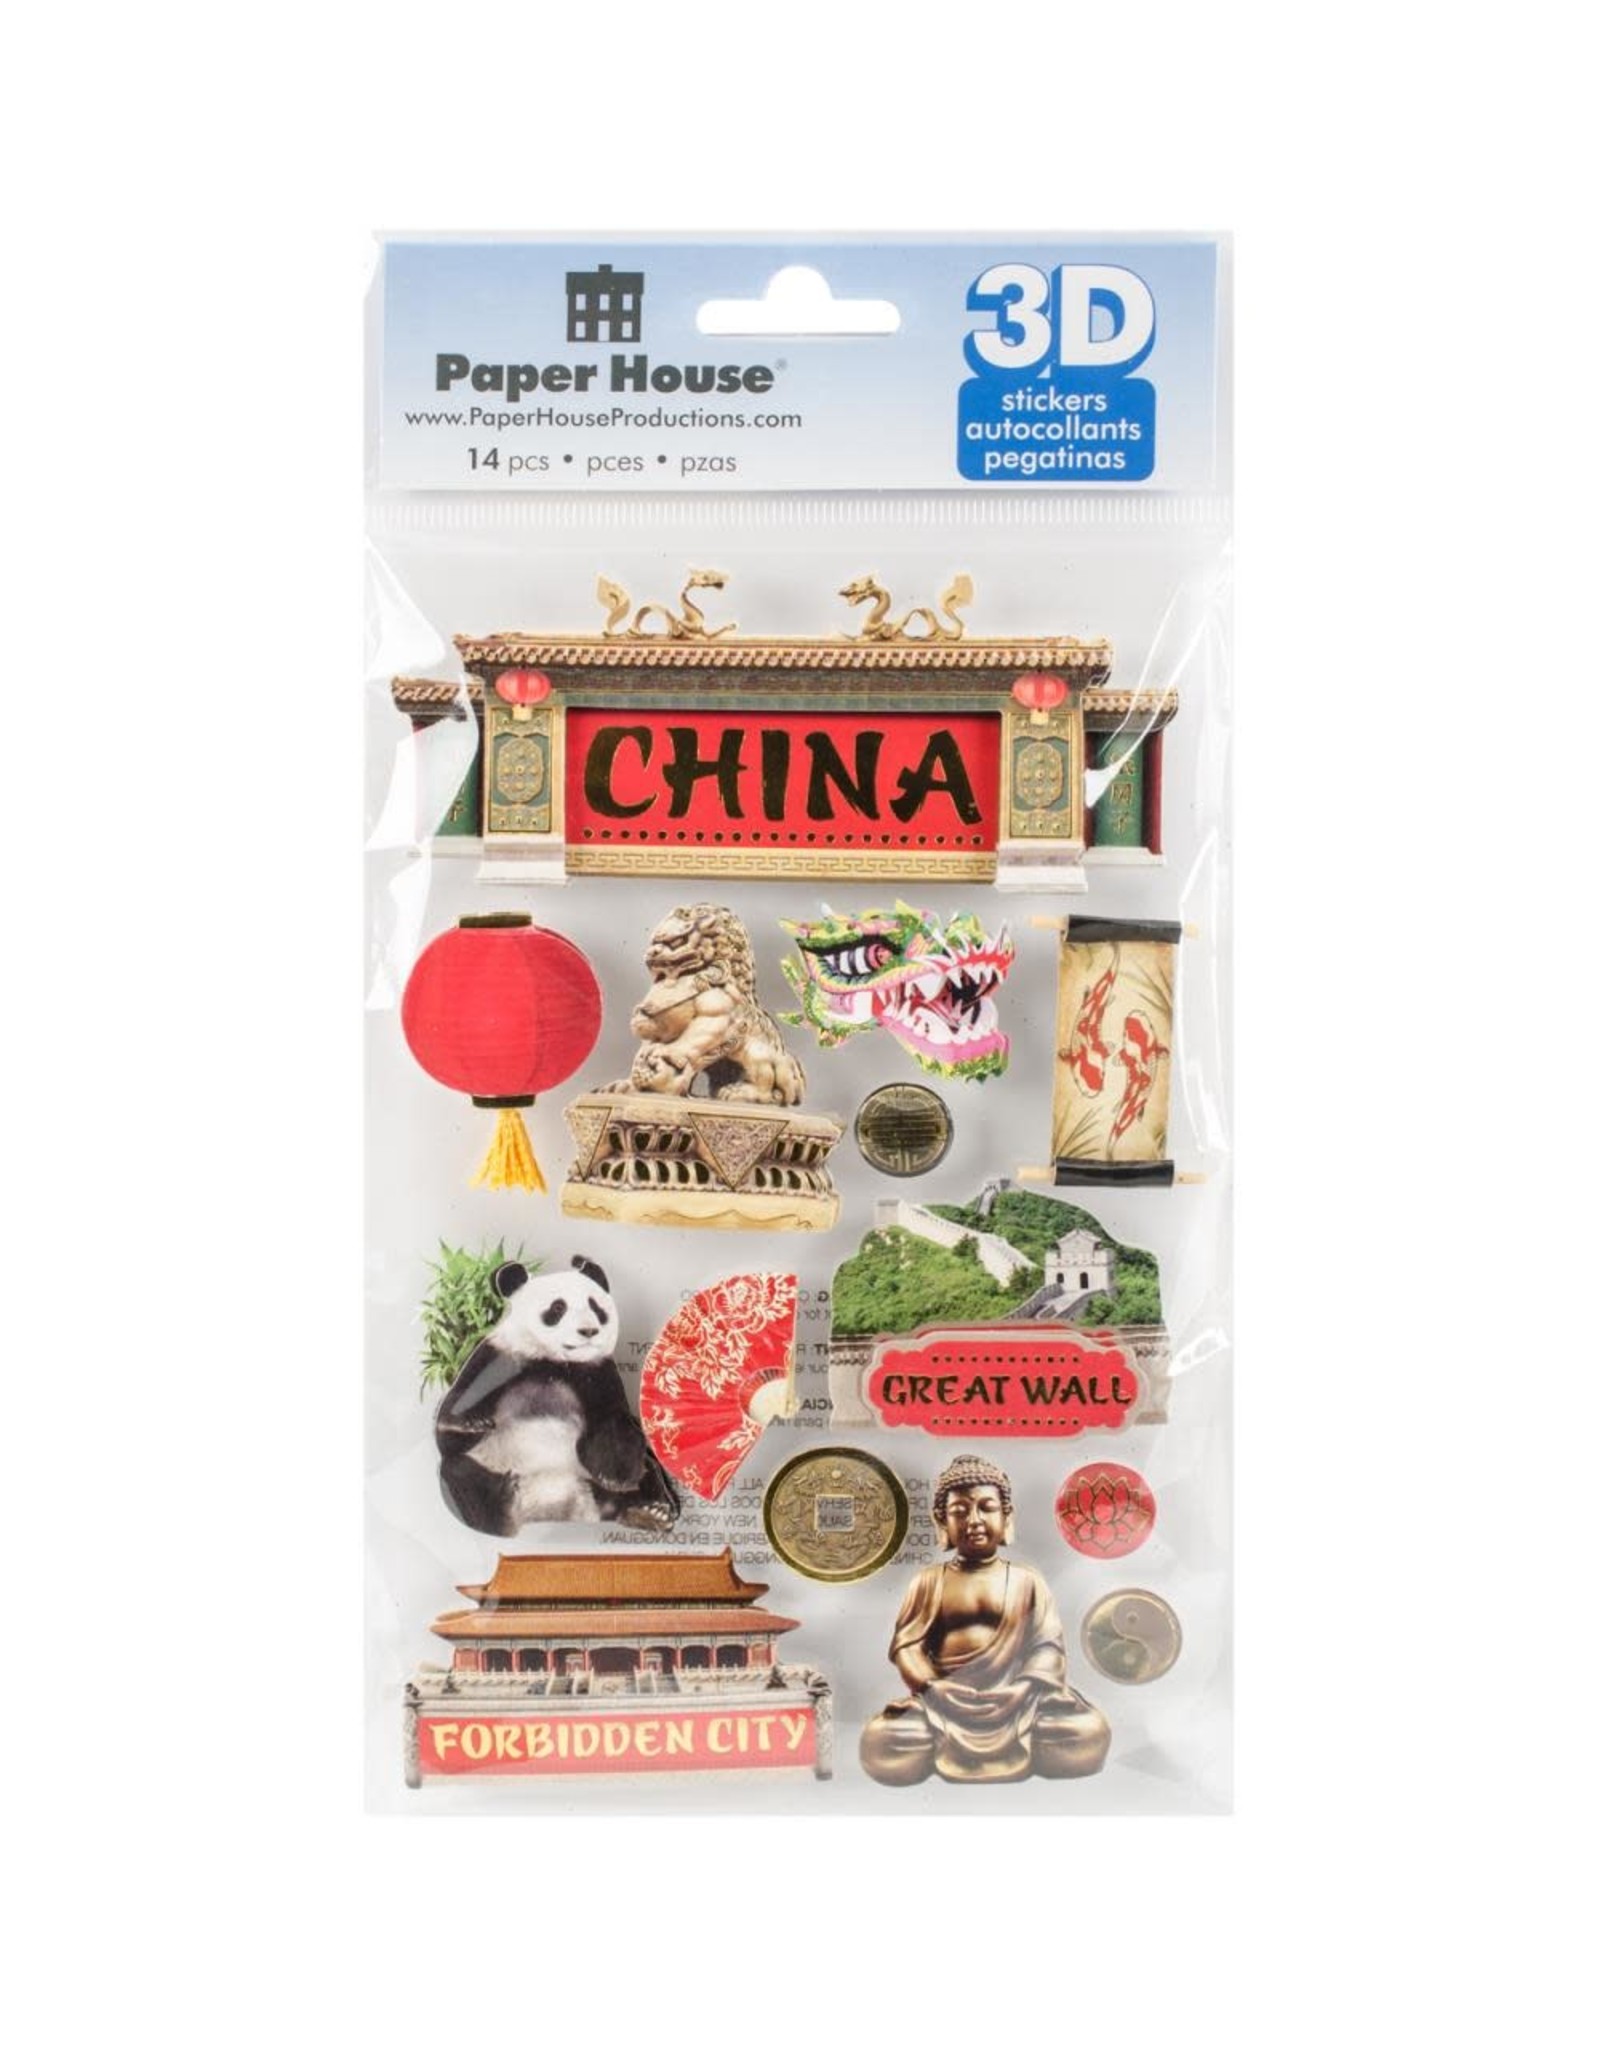 PAPER HOUSE PRODUCTIONS PAPER HOUSE CHINA 3D STICKERS